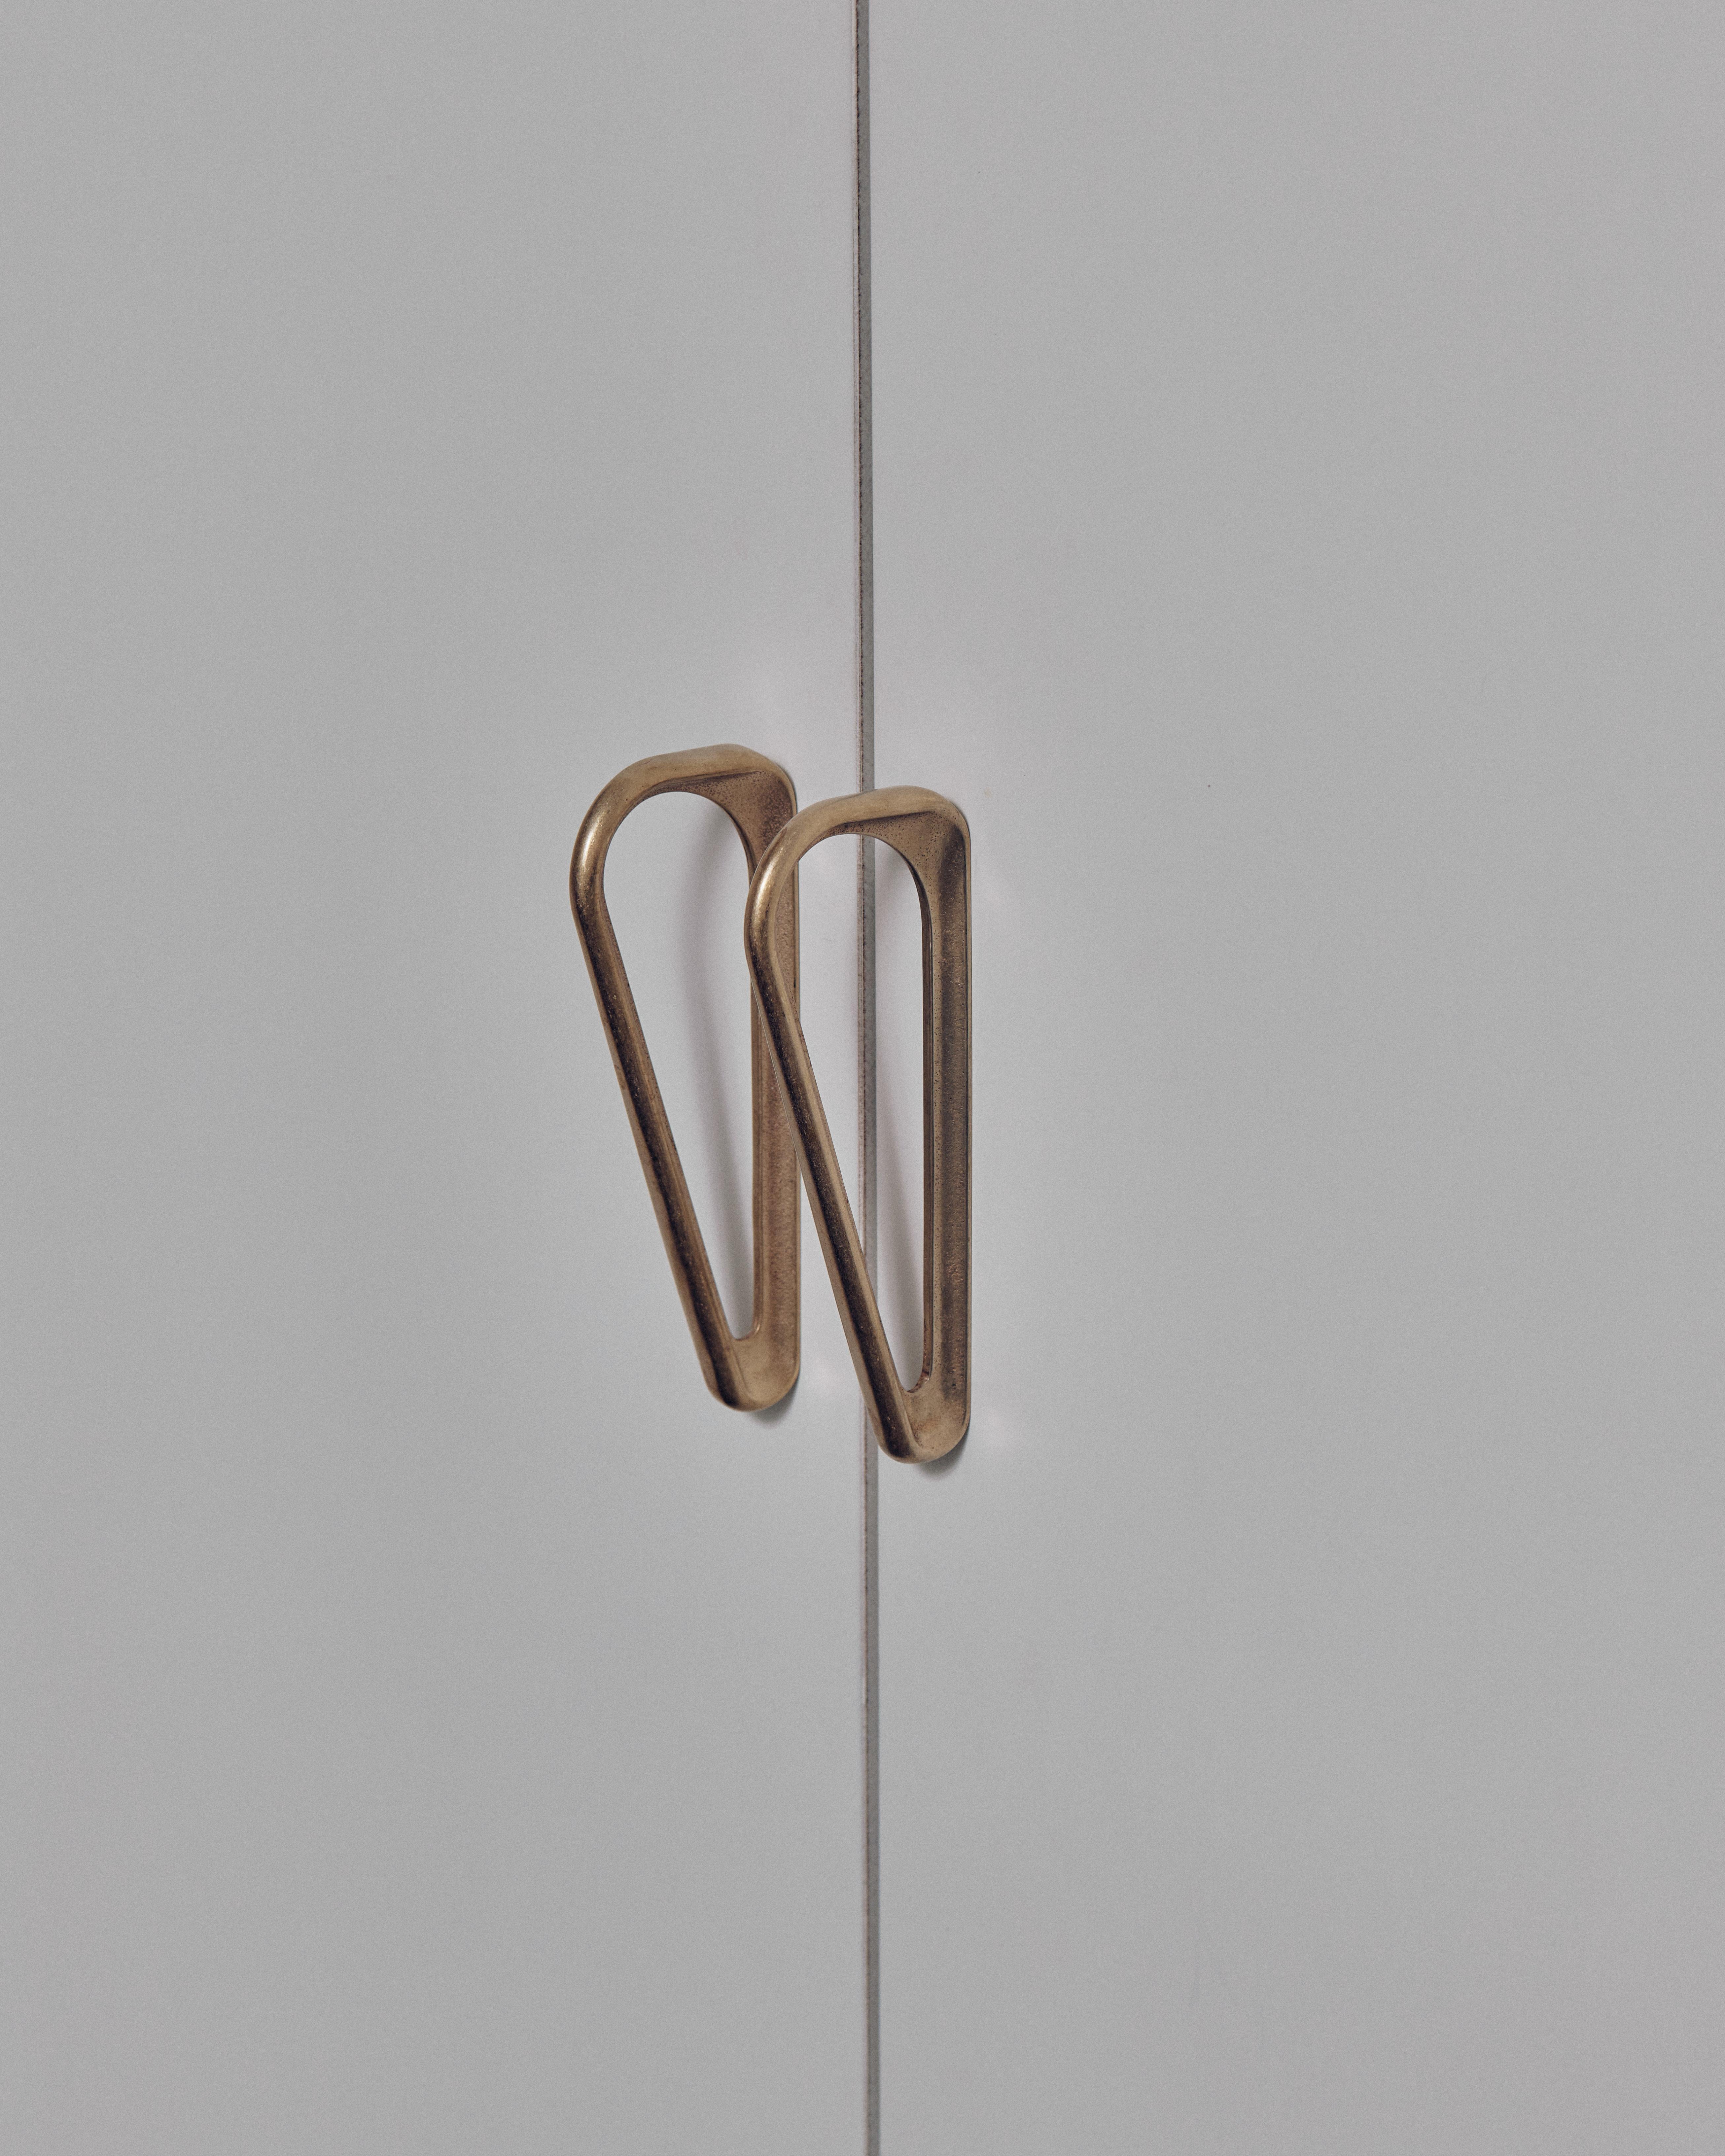 Set of 2 Brass Planchart Handles by Henry Wilson
Dimensions: W 2 x D 8 x H 19 cm
Materials: Brass

Brass Planchart Handle to suit cabinetry and doors.

Each piece is sand cast and rumbled finished.

Aluminium Planchart Handles are bold and unique.